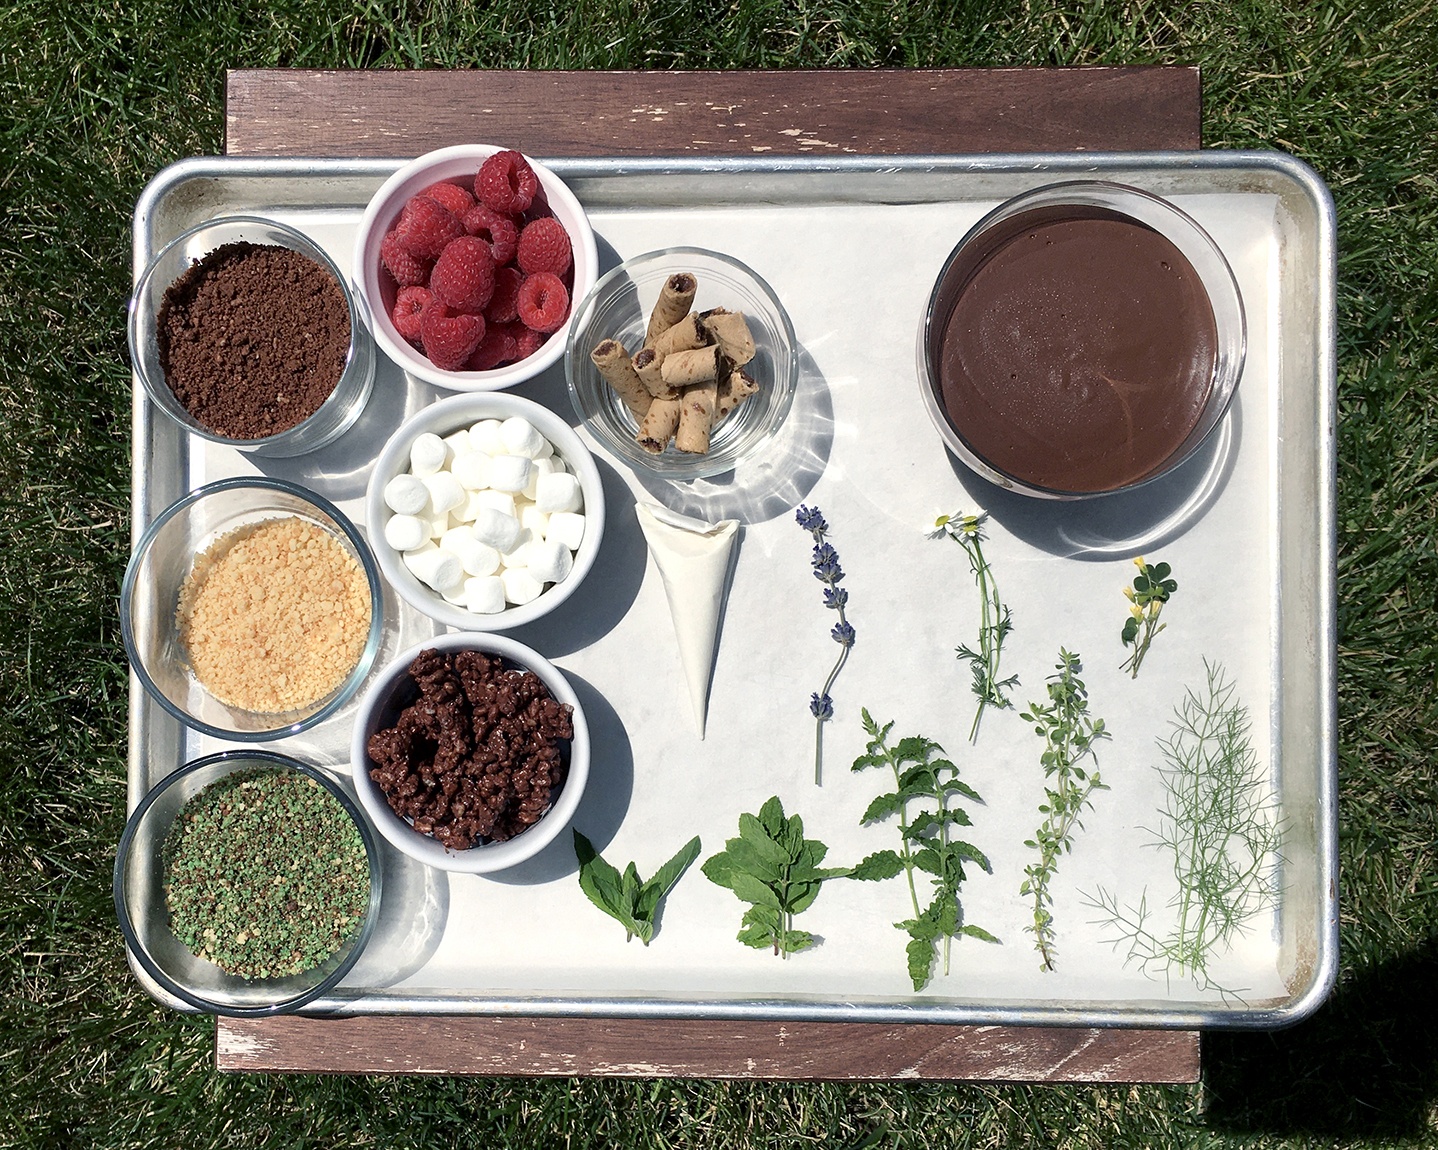 An overhead view of ingredients for the activity arranged on a baking sheet, which sits on a wooden bench on a lawn.